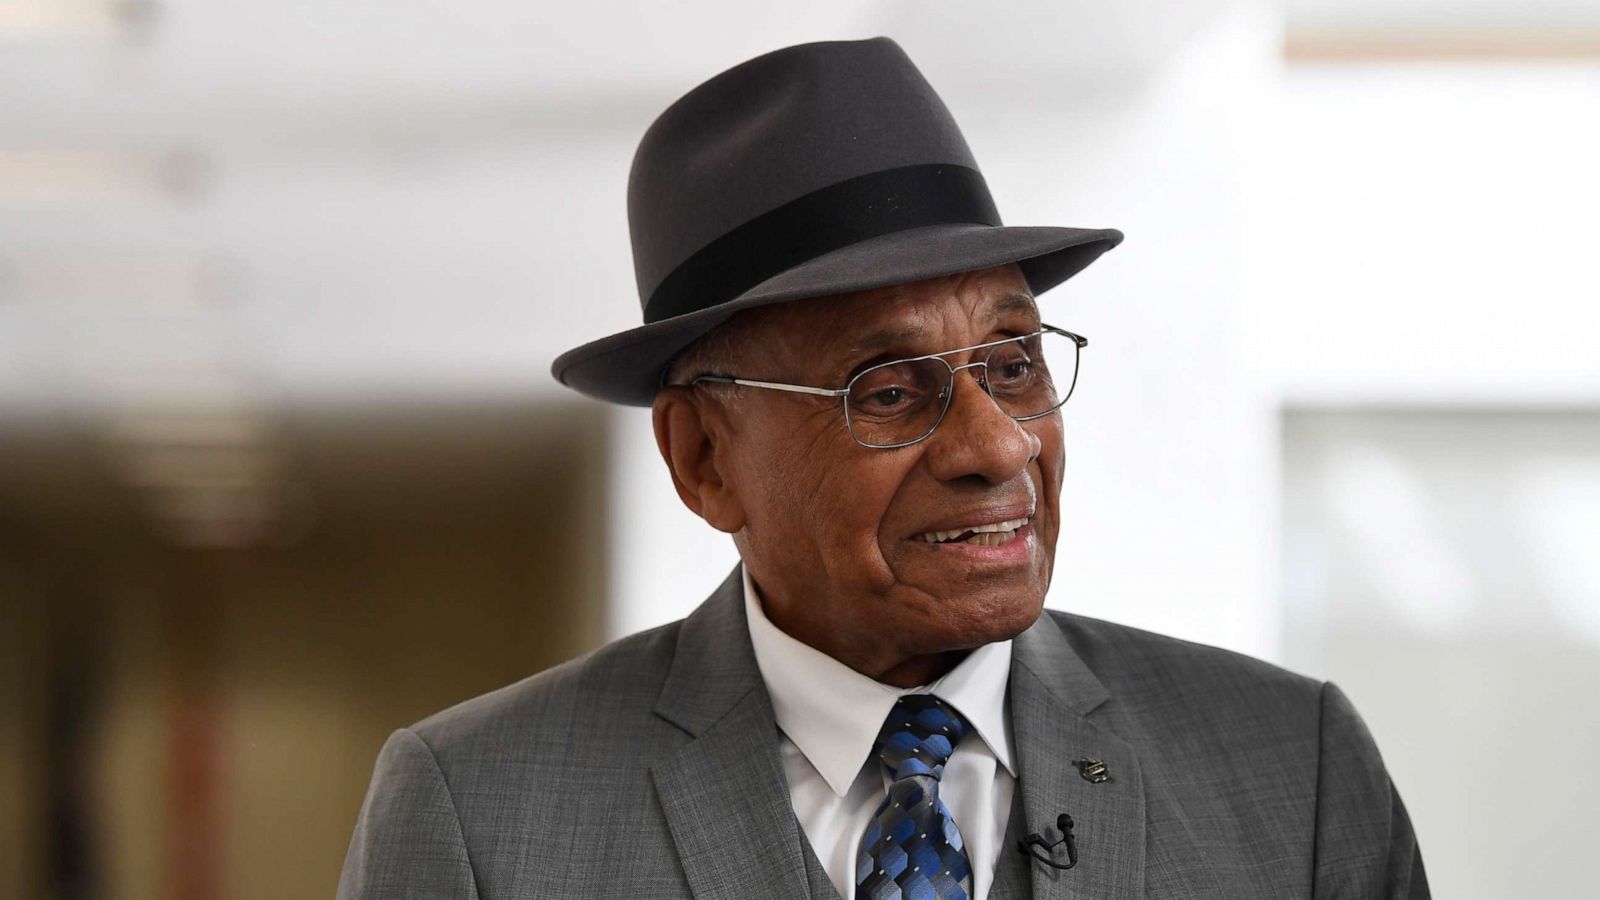 Memories: Willie O'Ree is NHL's first black player 